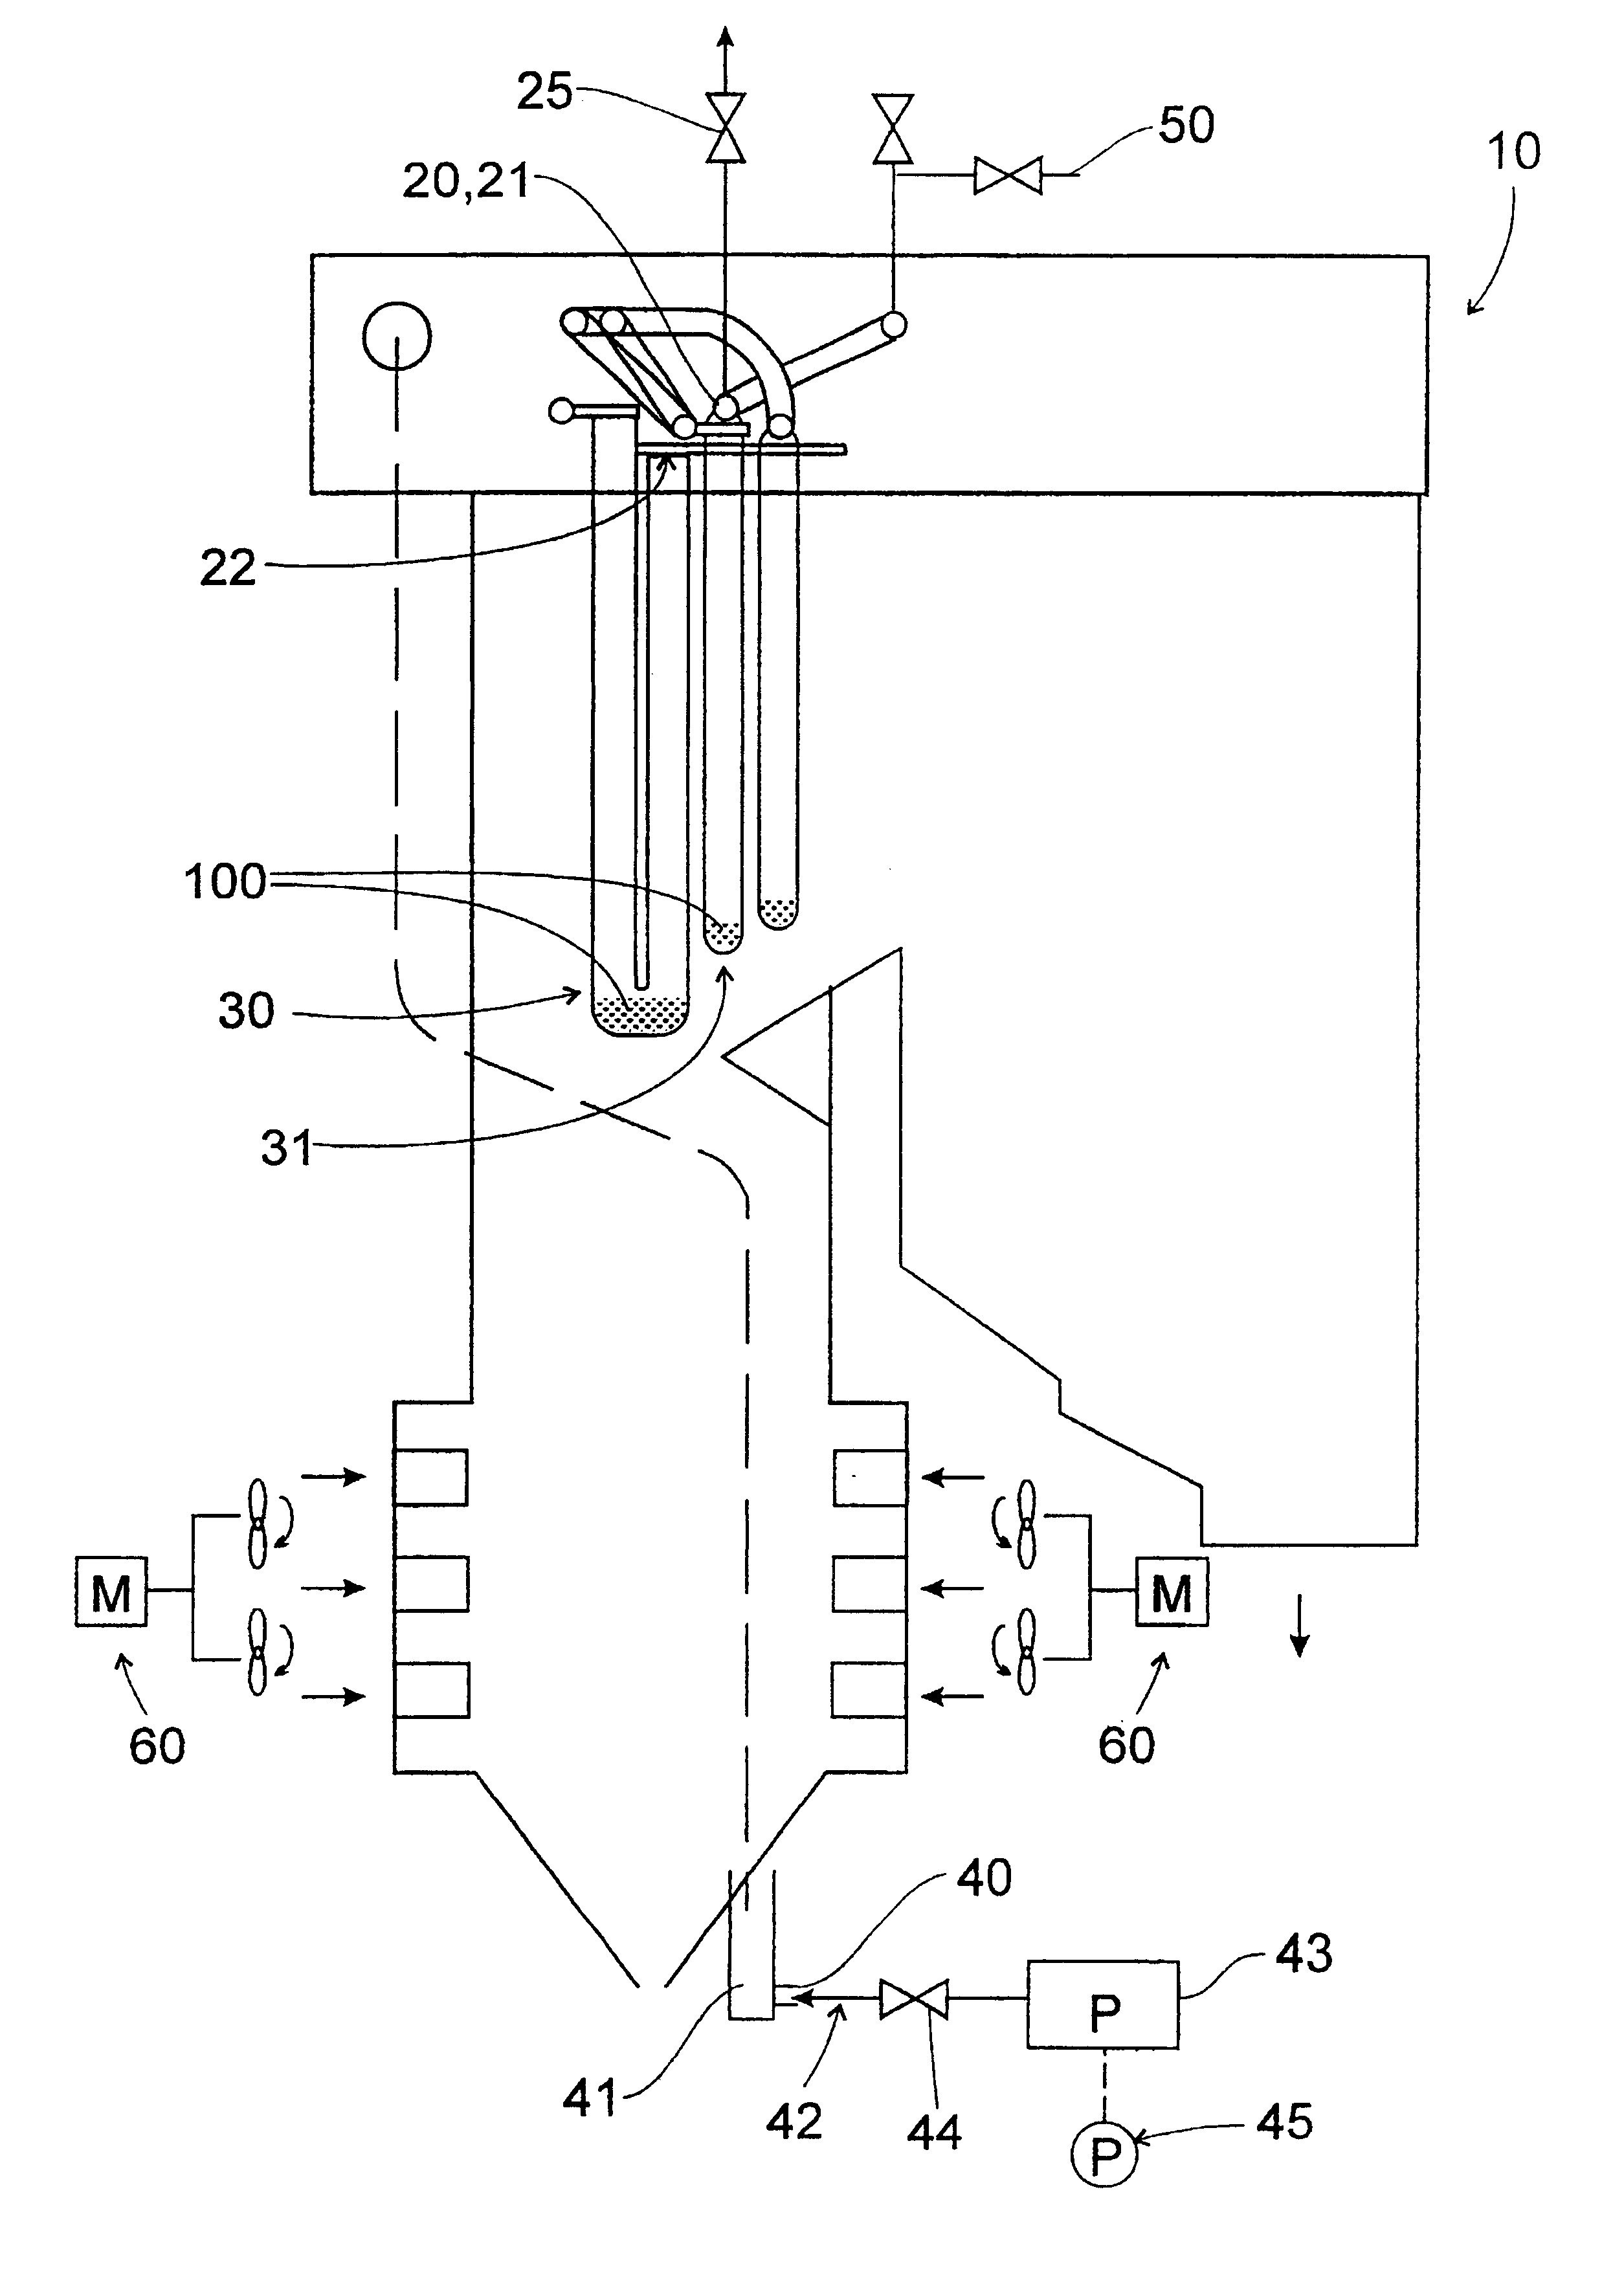 Exfoliated magnetite removal system and controllable force cooling for boilers